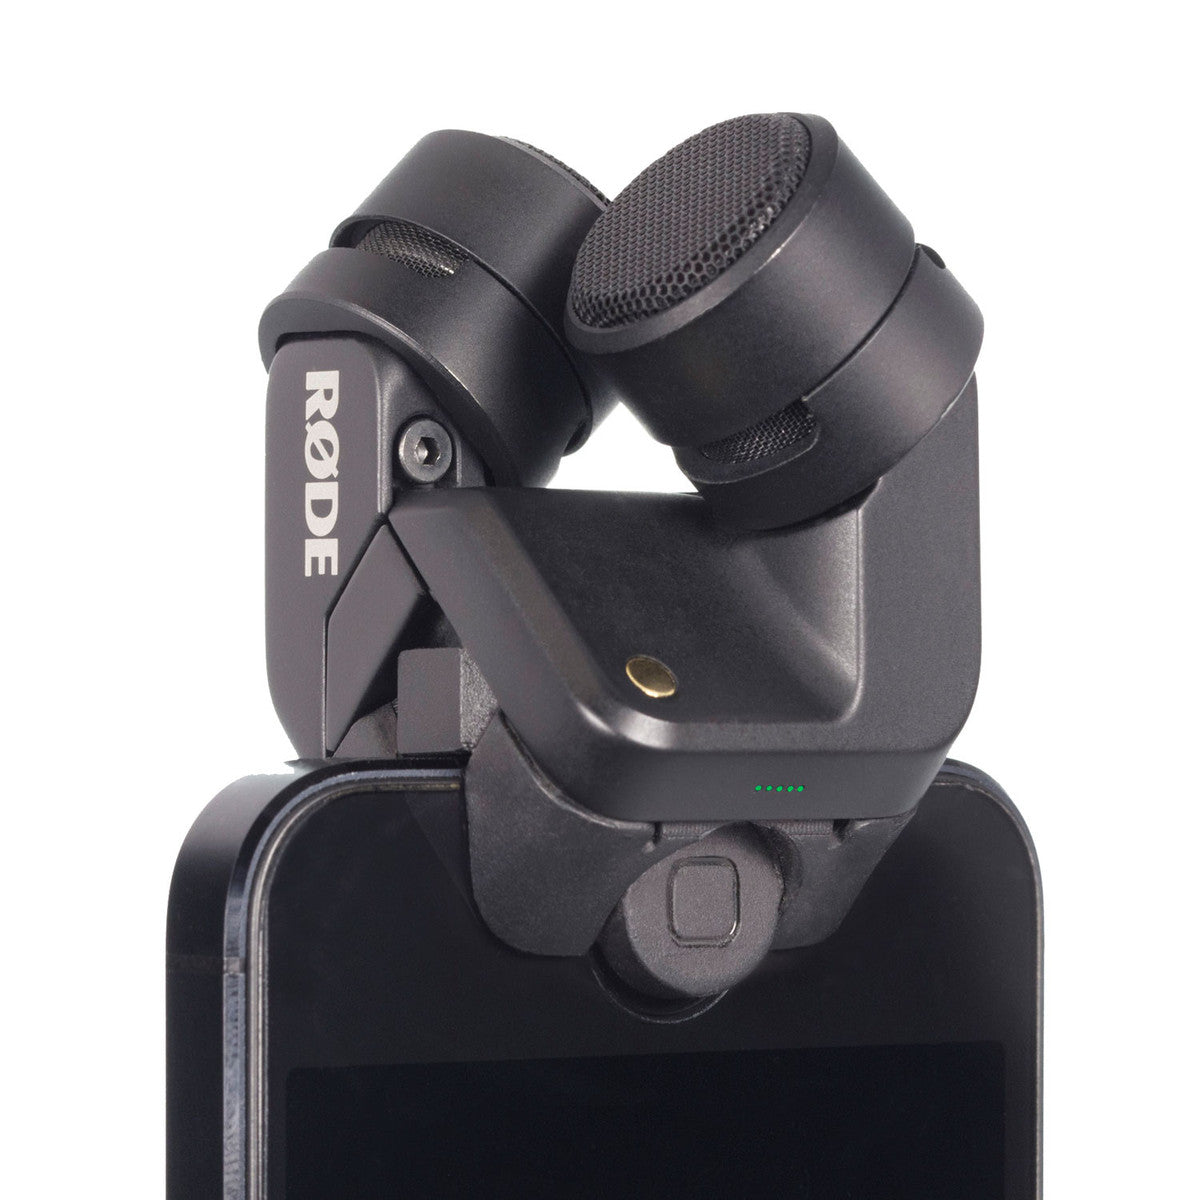 RØDE i-XY-L Stereo Microphone for iOS Lightning Devices